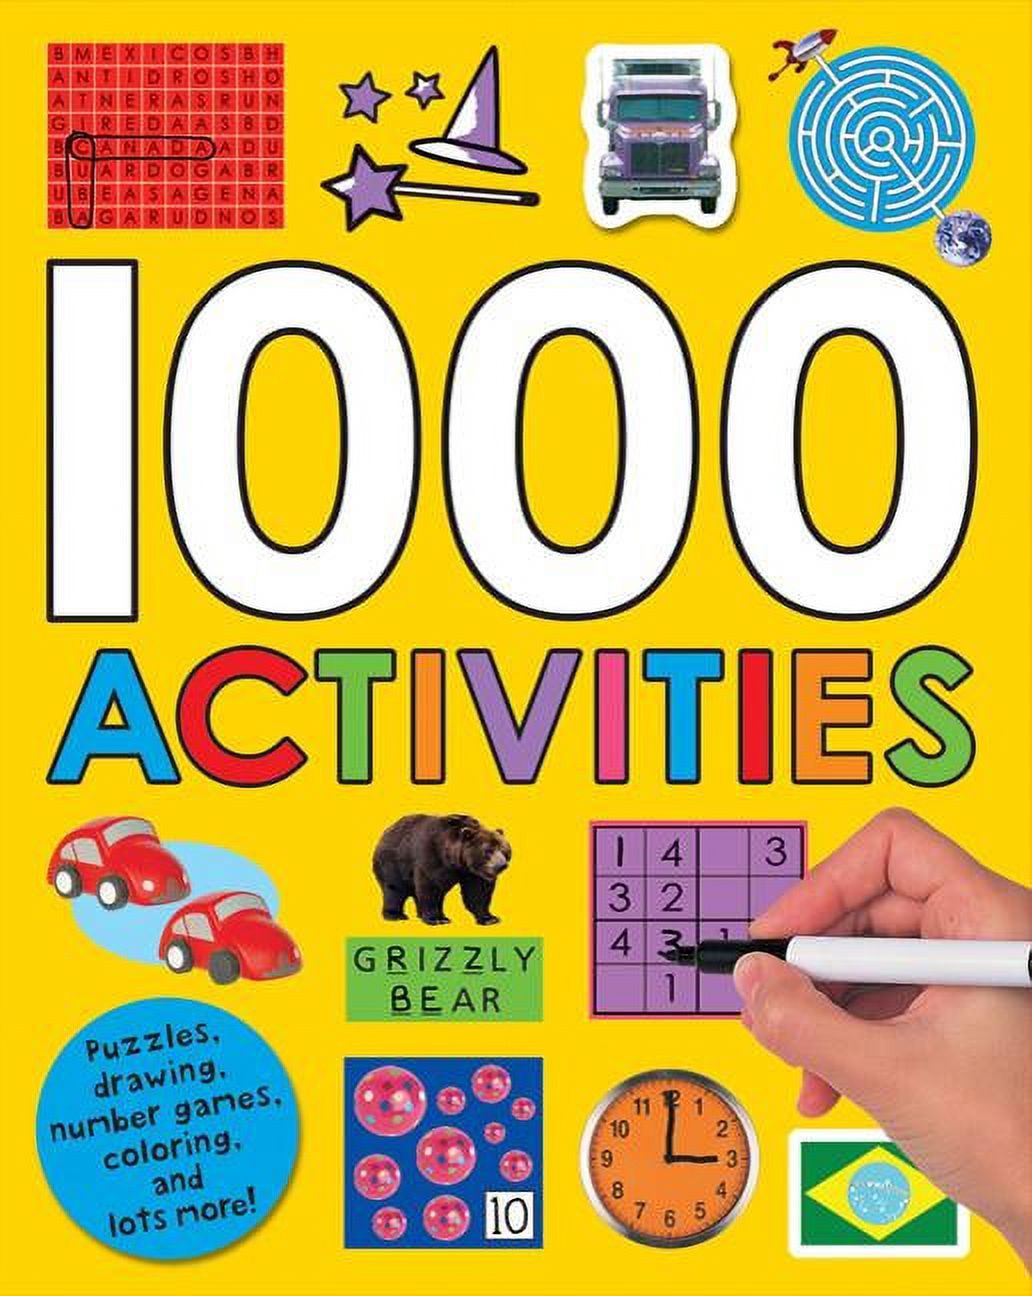 Sticker Activity Fun: 1000 Activities : Puzzles, drawing, number games, coloring, and lots more! (Paperback) - image 1 of 2